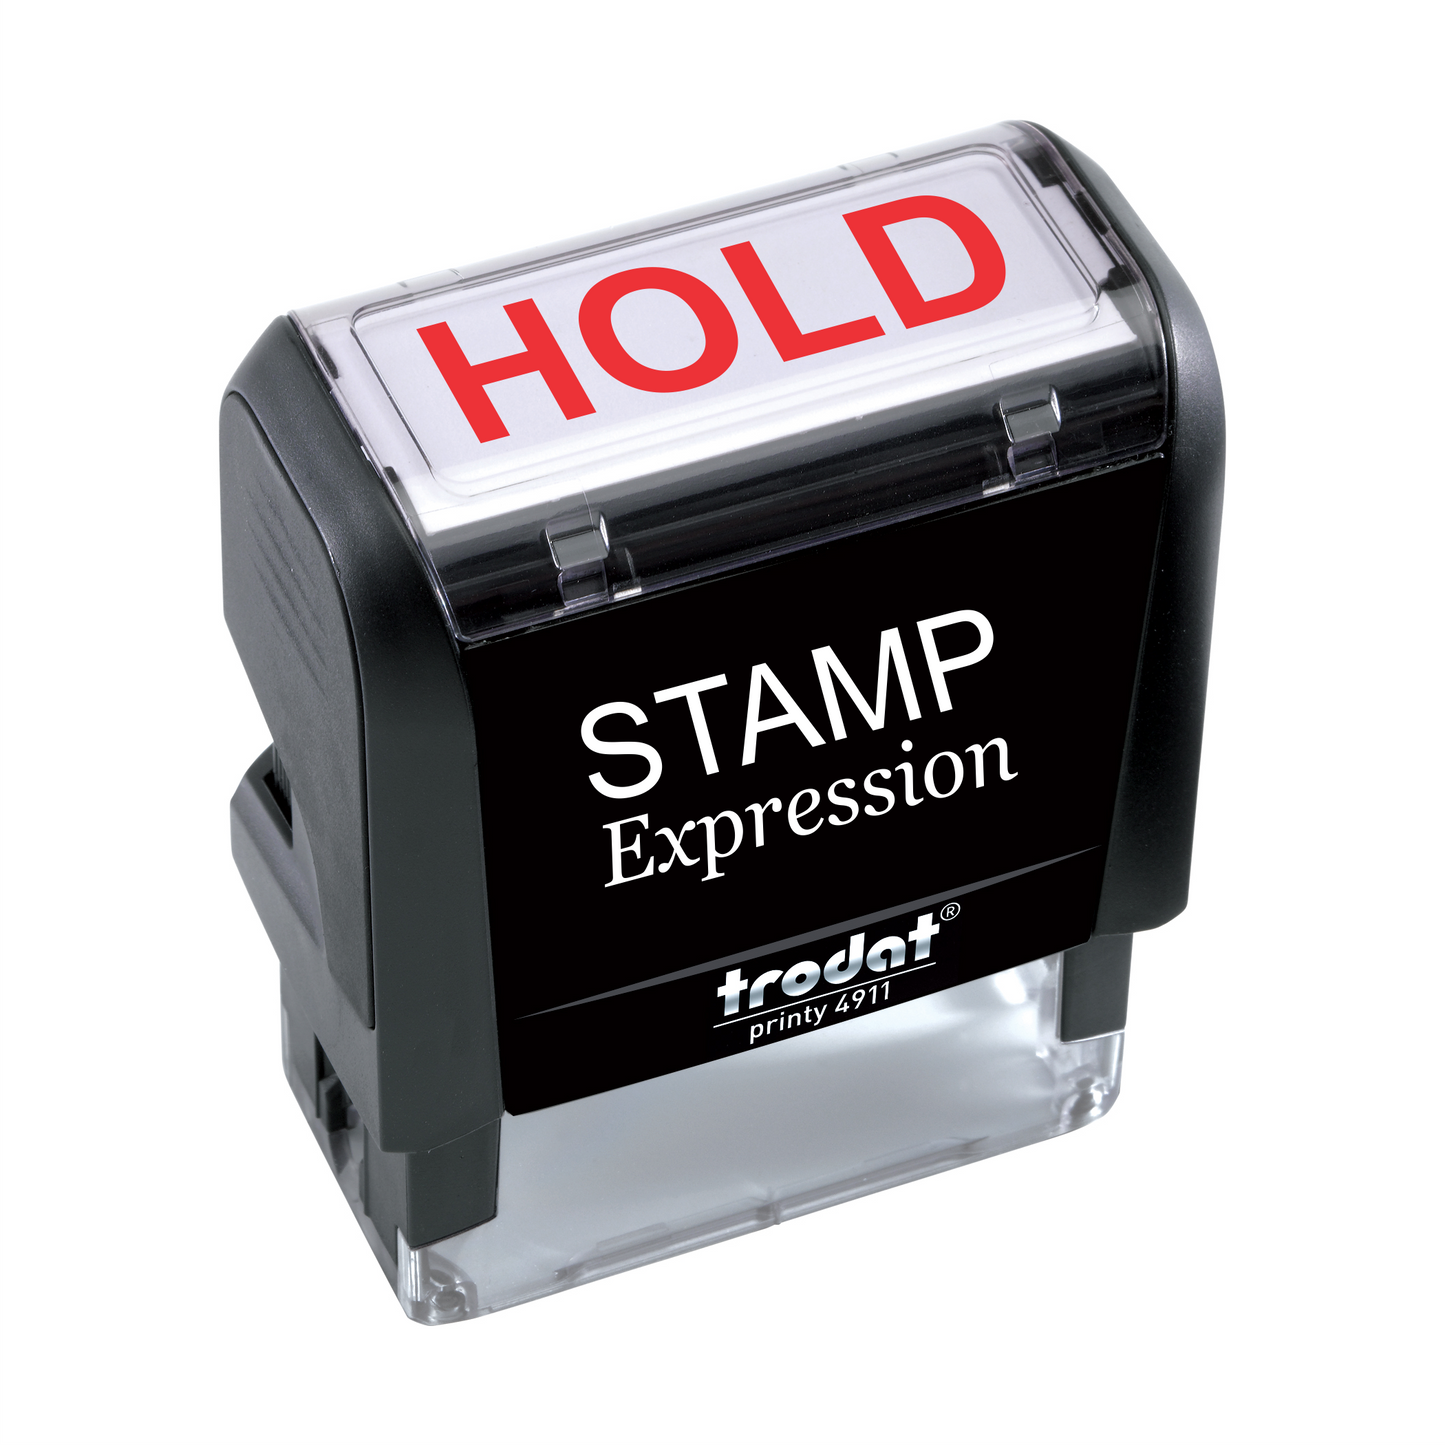 Hold Office Self Inking Rubber Stamp (SH-5309)